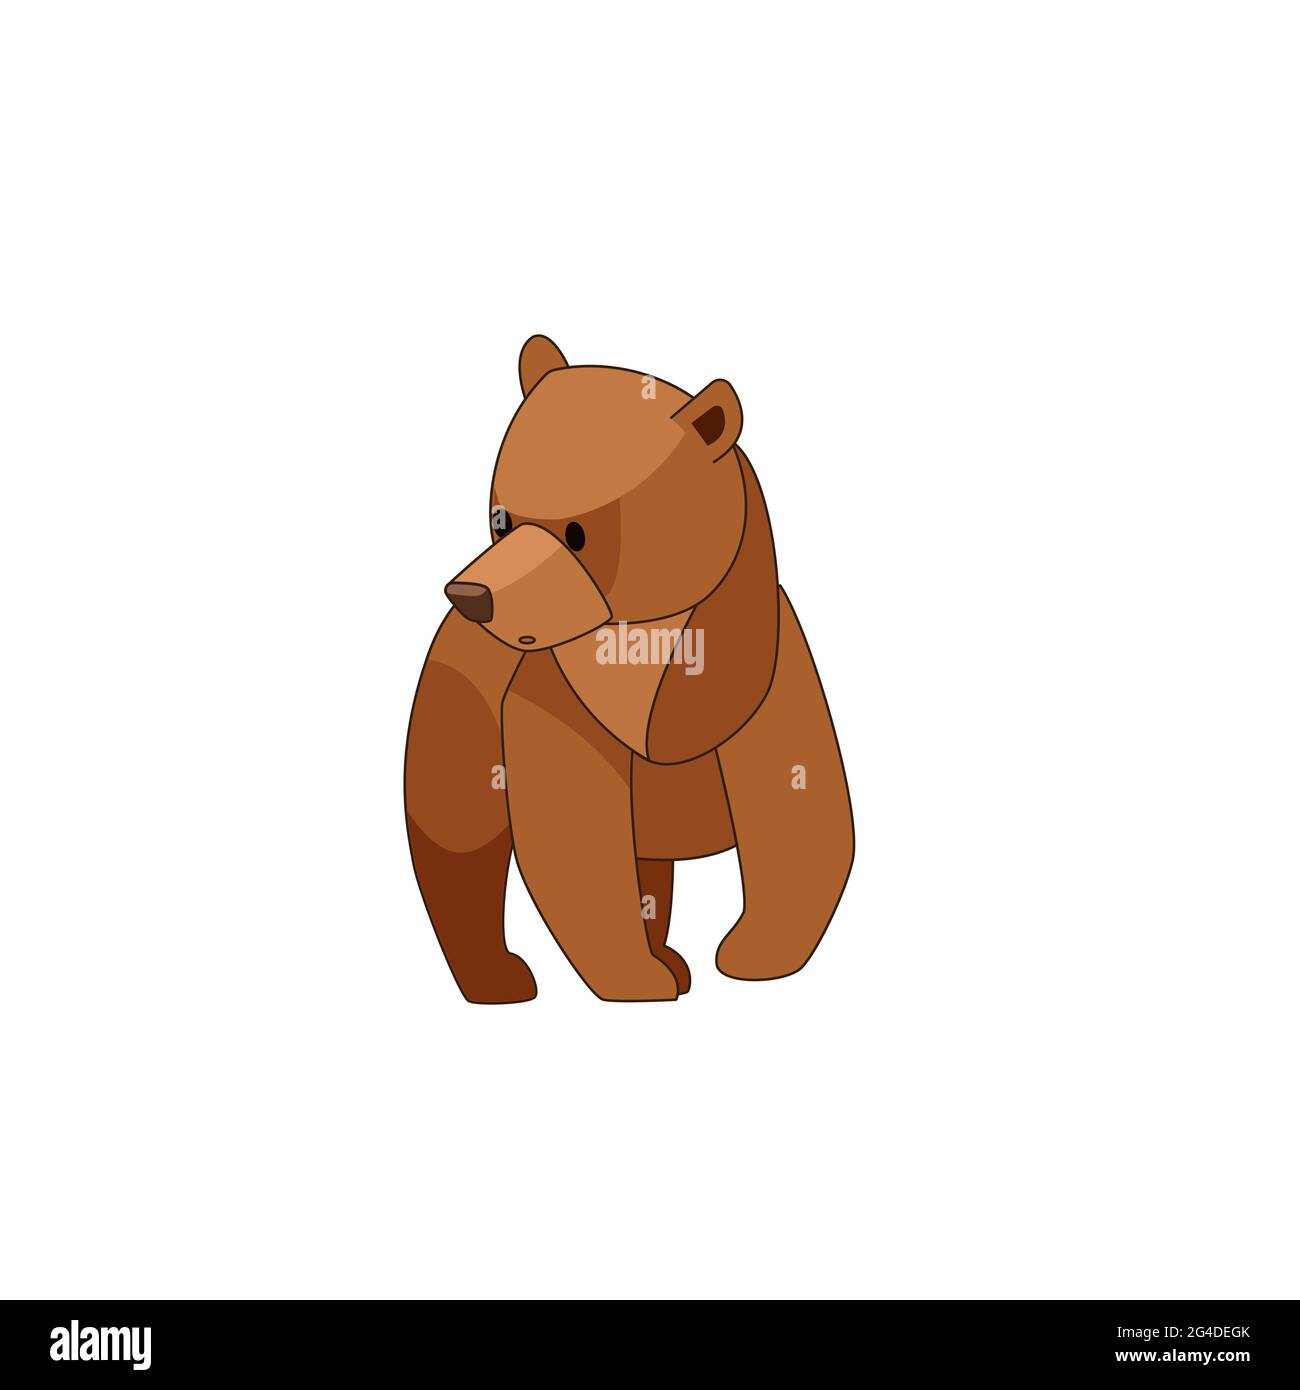 The bear cub walks around and looks around in surprise. Front view. Cartoon character of a baby mammal animal. A wild forest creature with brown fur Stock Vector